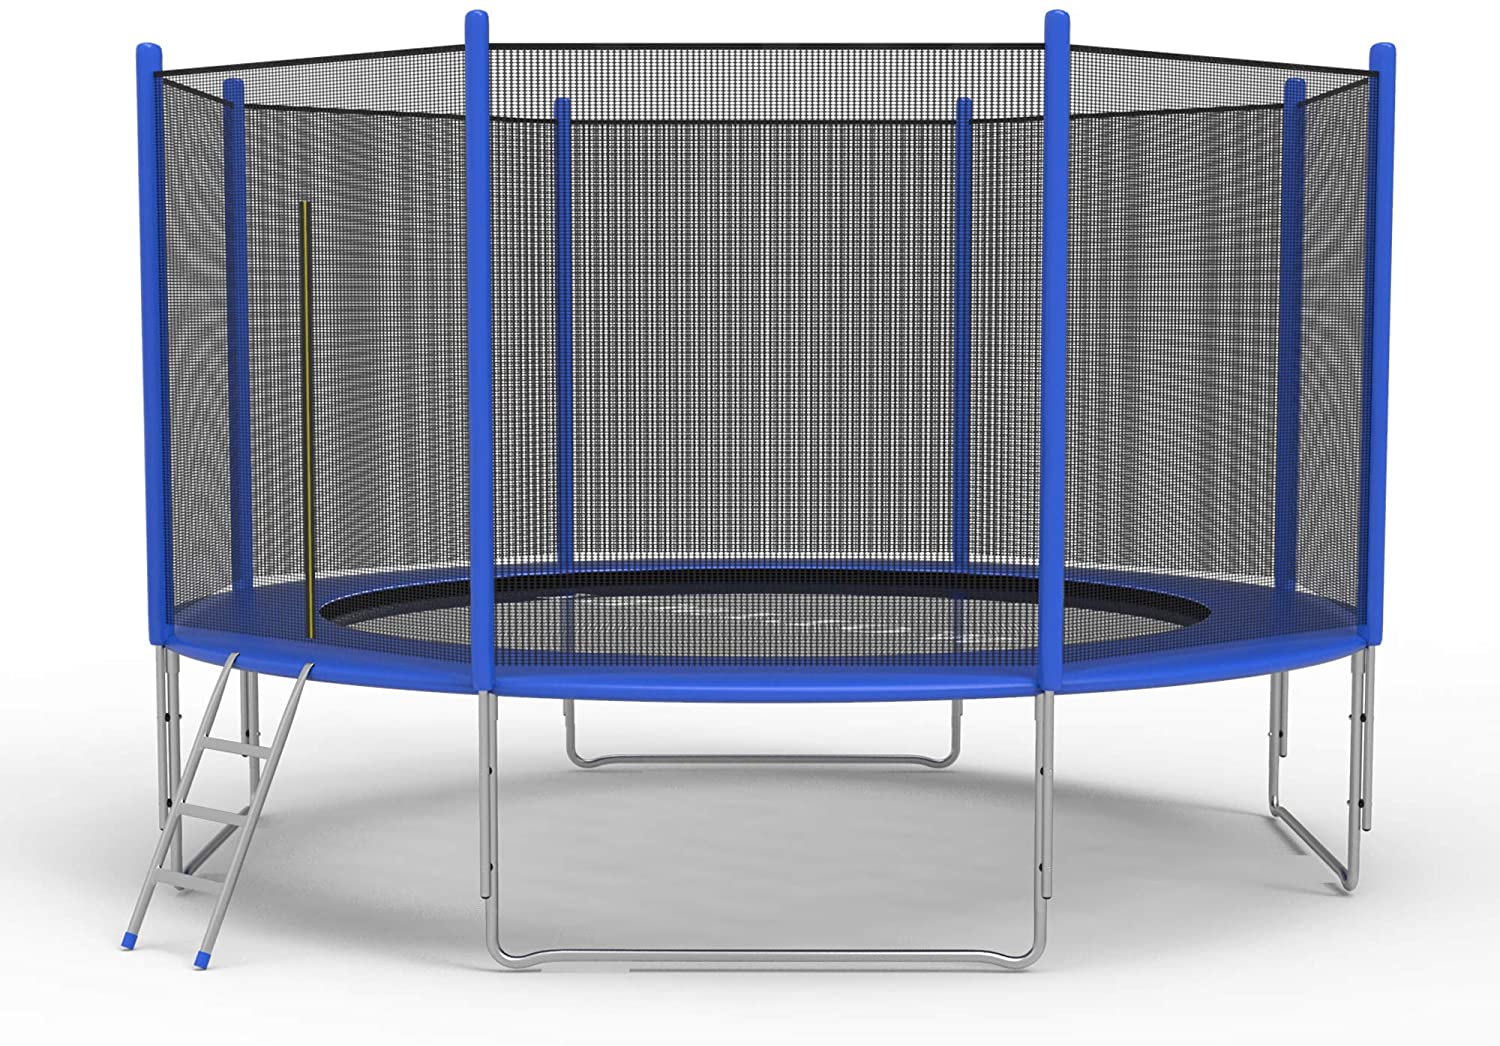 10 FT Recreational Trampoline with Safety Enclosure Net and Ladder and Spring Cover - Outdoor Backyard Bounce Jump Have Fun